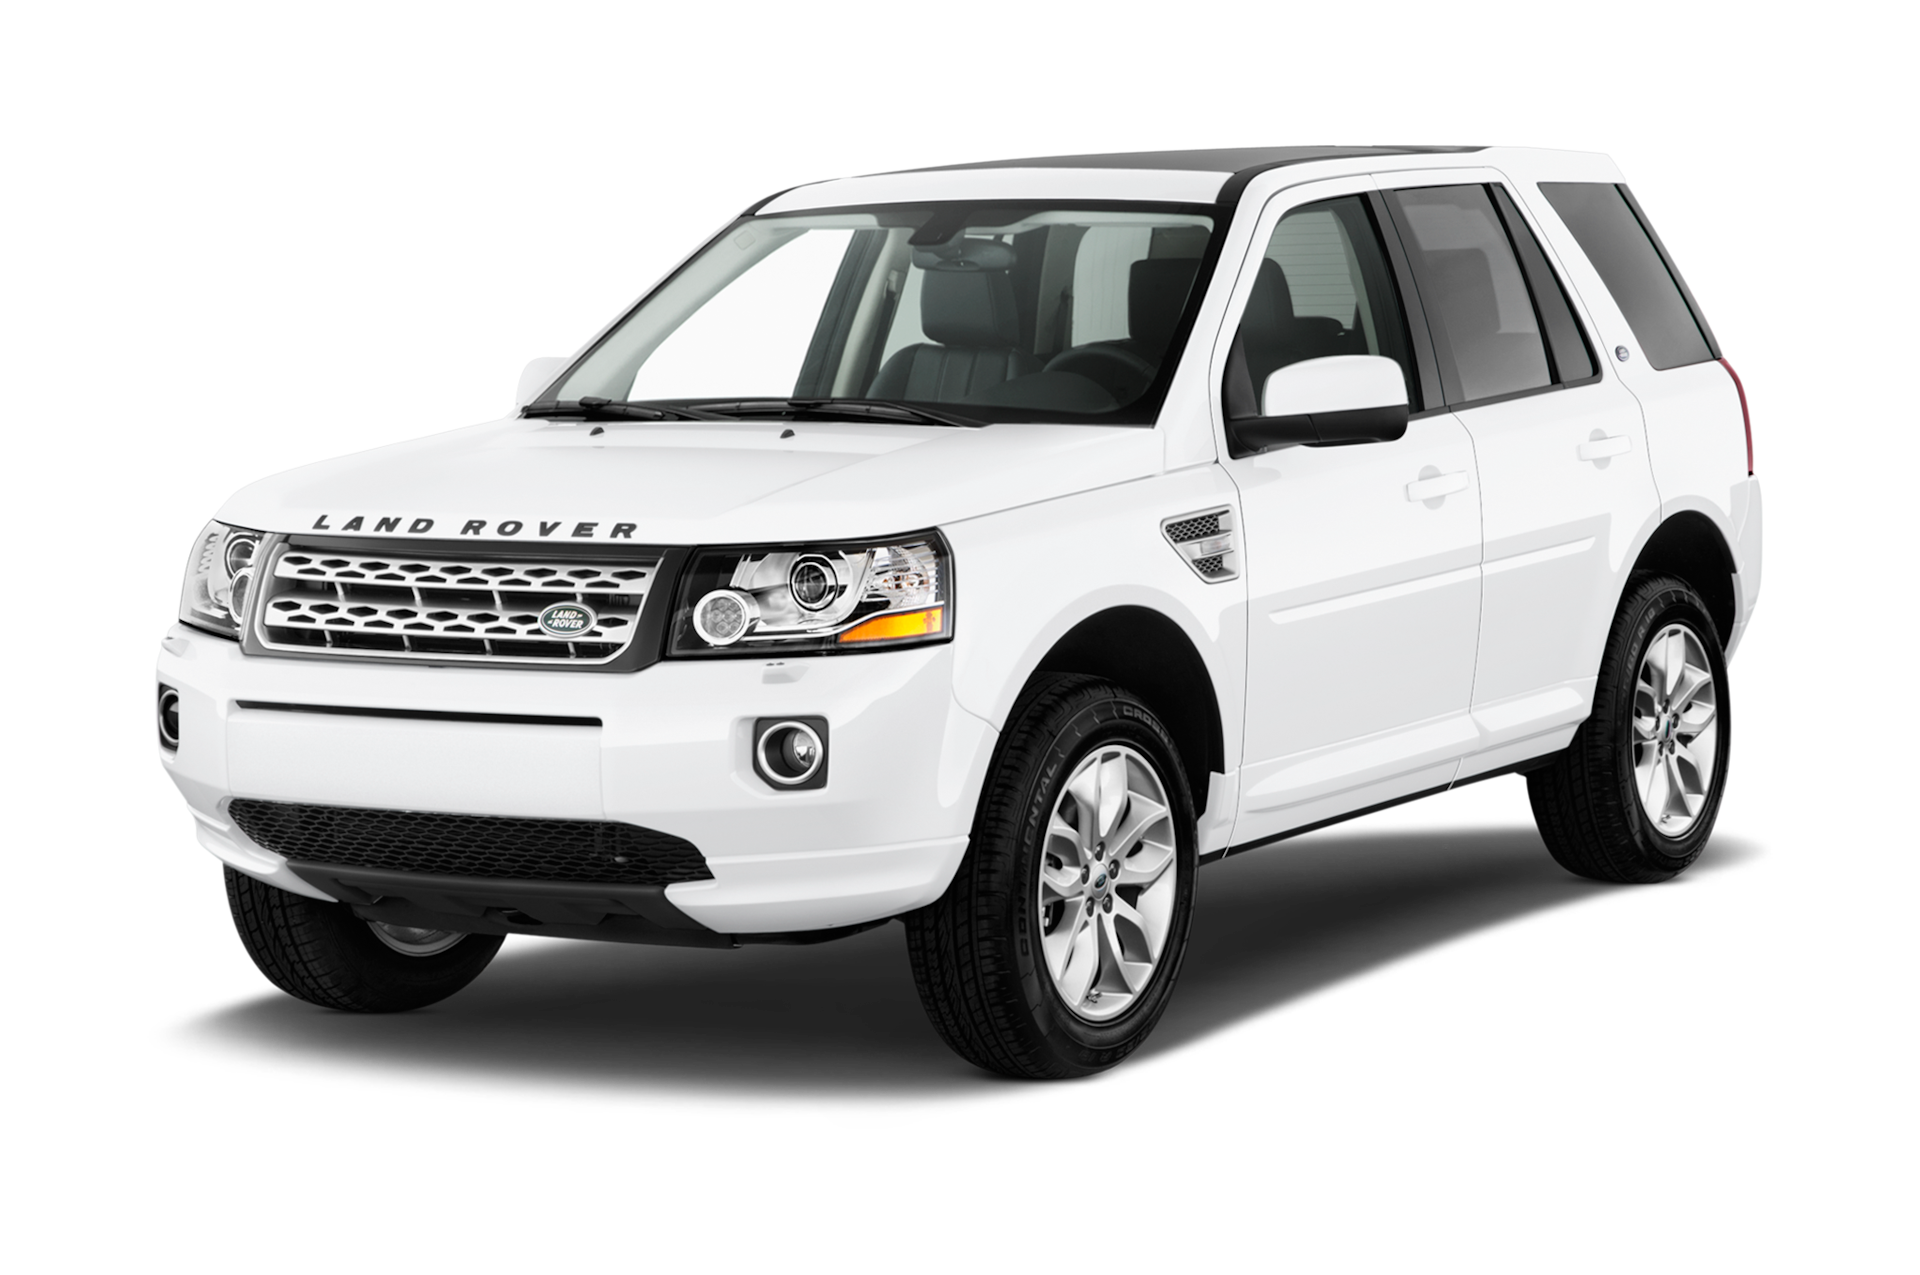 2015 Land Rover LR2 Prices, Reviews, and Photos - MotorTrend